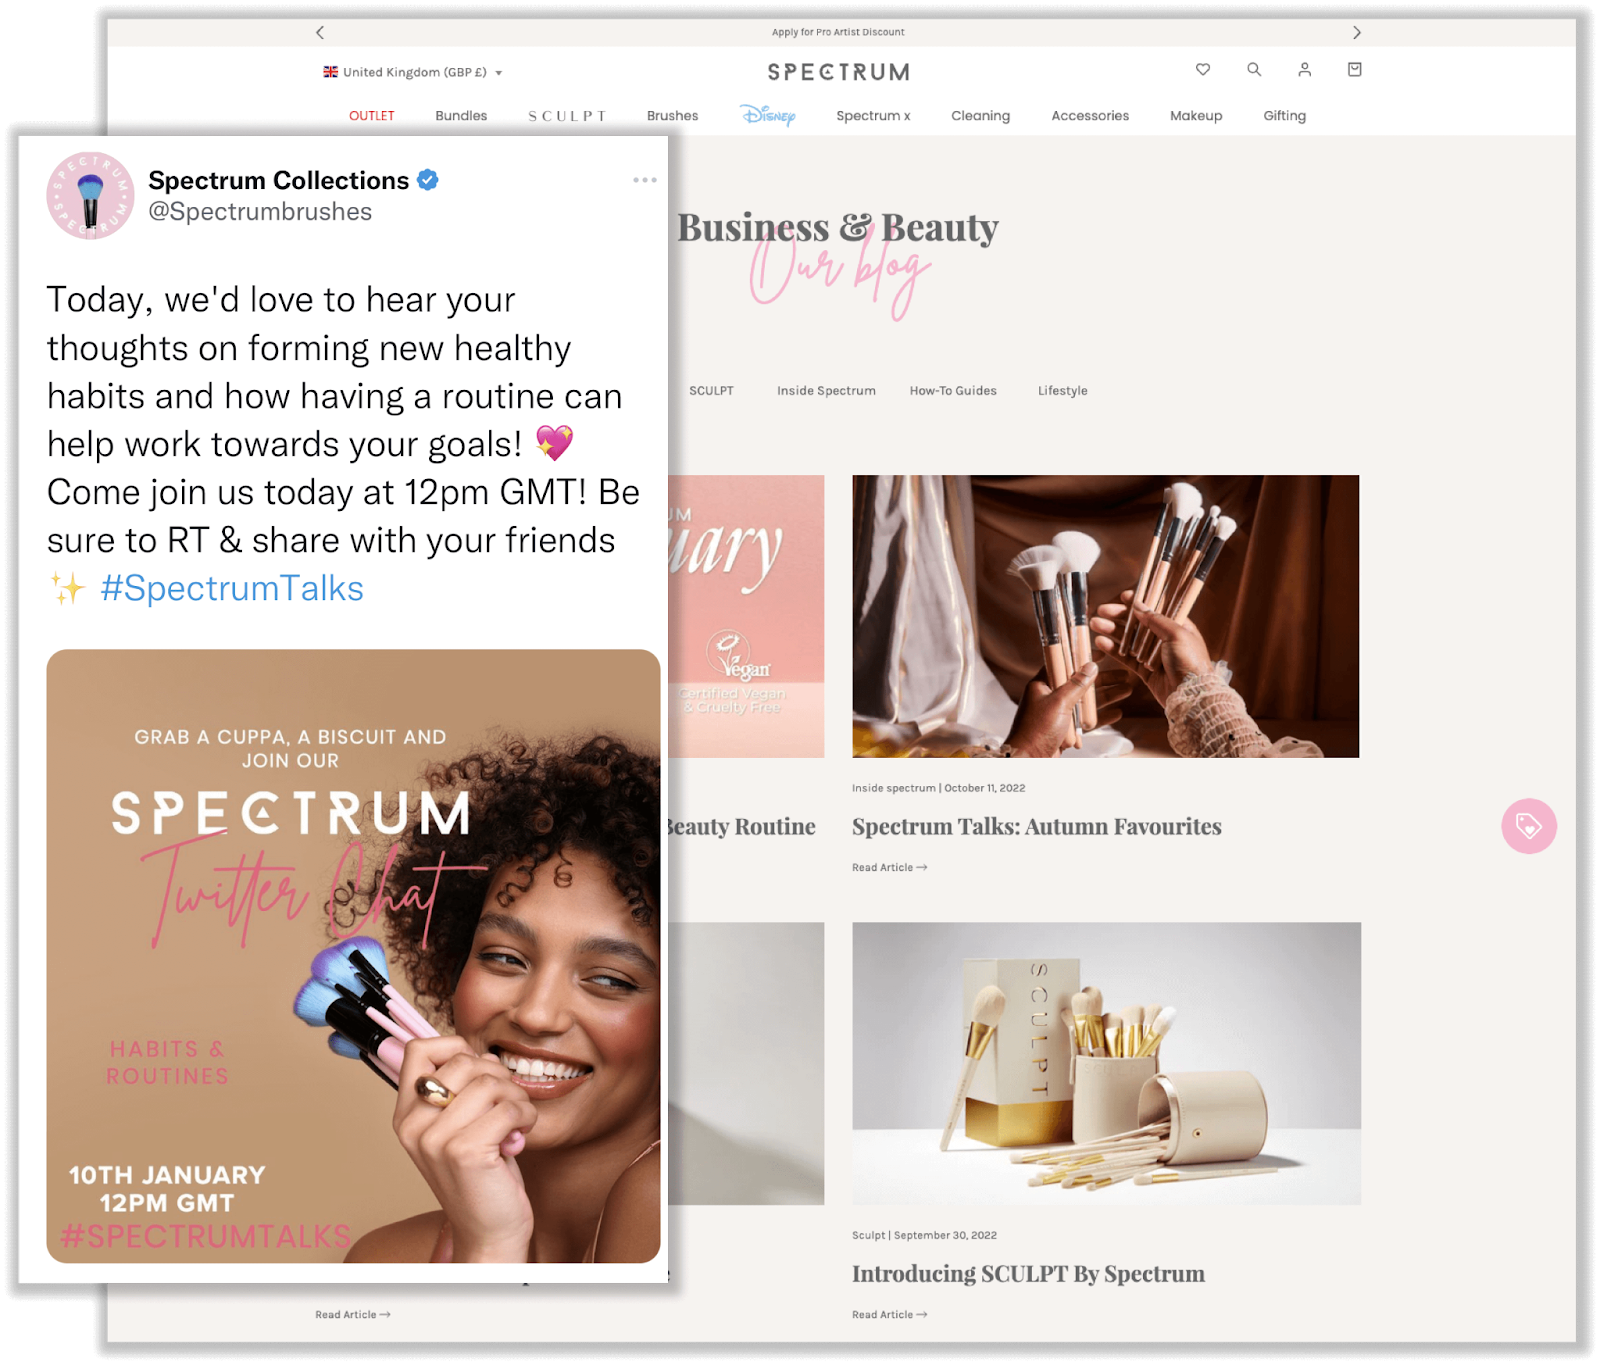 Loyalty Programs in the Beauty Industry–A screenshot showing two overlapping images from Spectrum’s Twitter and blog. The Twitter image in front shows a tweet that says, “Today, we’d love to hear your thoughts on forming new healthy habits and how having a routine can help work towards your goals! Come join us today at 12pm GMT! Be sure to RT and share with you friends #SpectrumTalks”. There is an image below with those details and an image of a woman with brown curly hair smiling and holding several multicolored spectrum brushes. The image below is a screenshot from the Business and Beauty blog. There are two visible articles entitled, ‘Spectrum Talks: Autumn Favourites’, and ‘Introducing SCULPT by Spectrum’. Both feature images for each article show Spectrum makeup brushes.